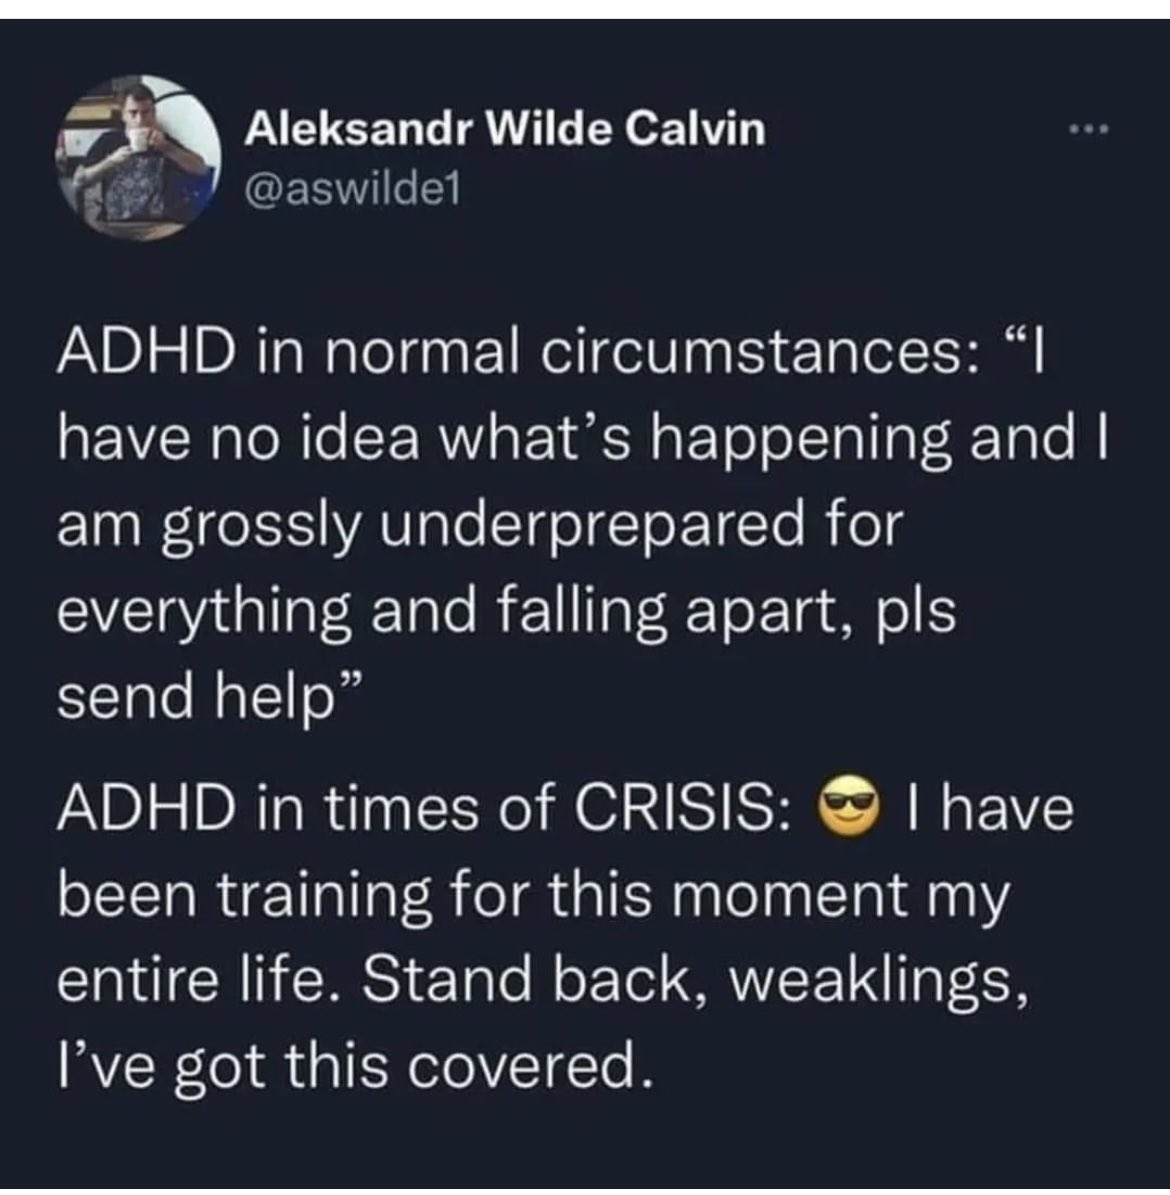 Ain’t this this truth?!

I think this is why folks with ADHD are so successful as the problem solvers, trouble shooters, crisis managers… the list goes on! 

#adhd #adhdhumor #adhdwomen #adhdmen #adhdentrepreneur #adhdleaders #adhdcoach #adhdstrengths